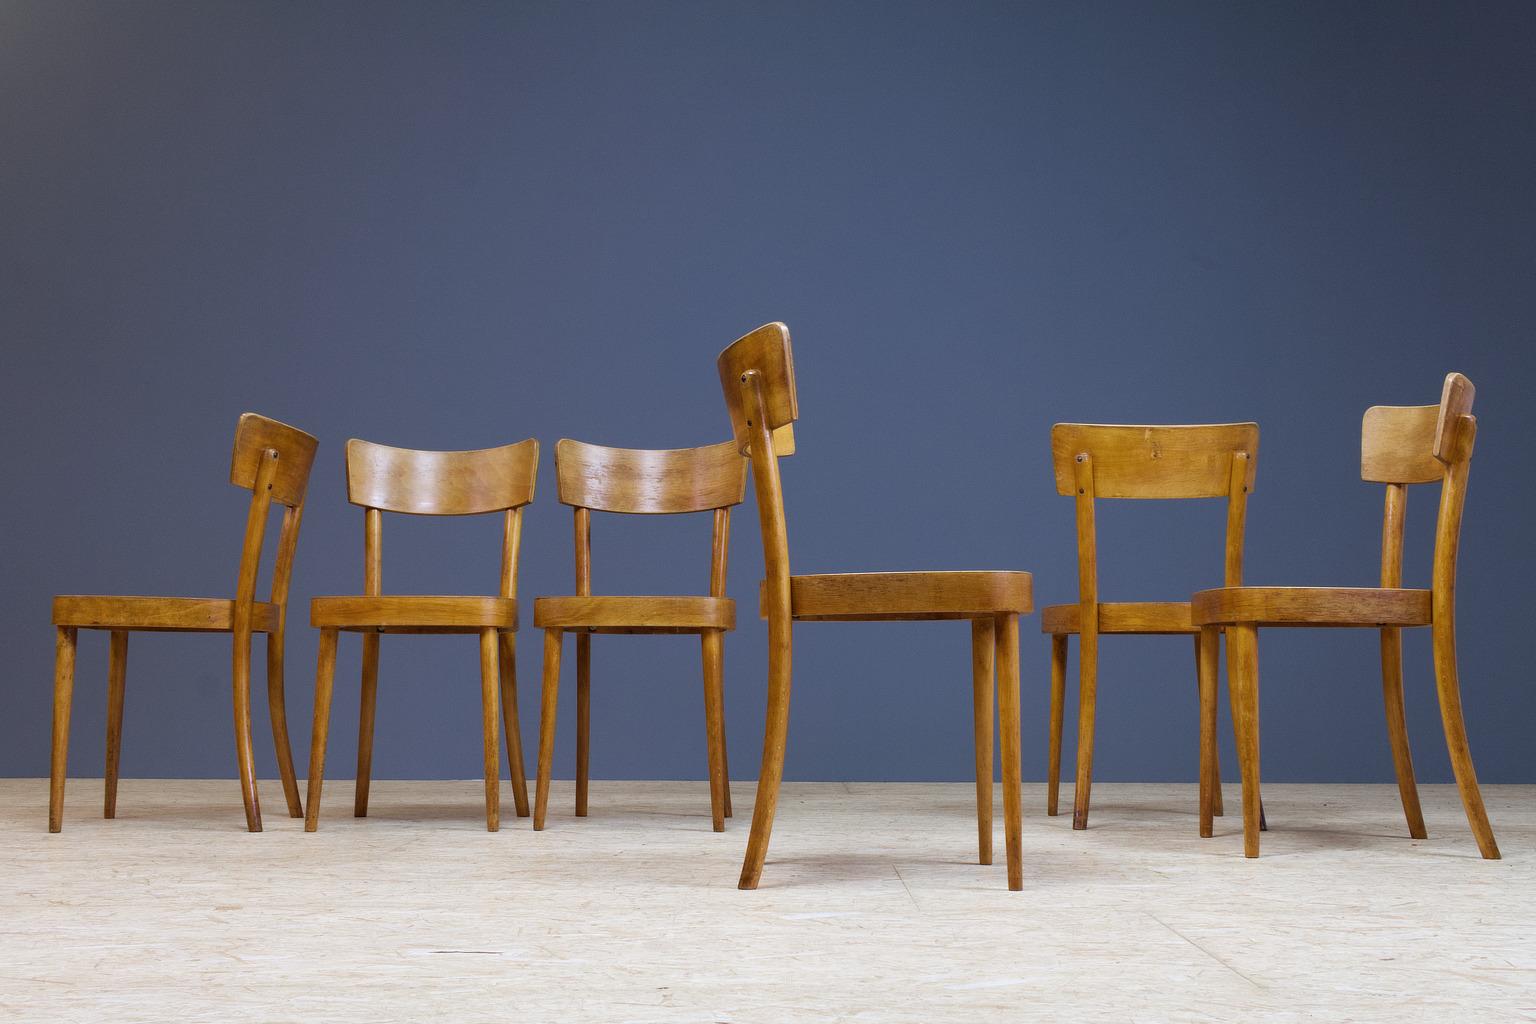 Set of six very charming birch plywood dining chairs, 1950s. A midcentury boutique or bistro set which holds clear features of the Thonet family, such as the bent back legs, the construction and the shape of the seating. The use of materials and